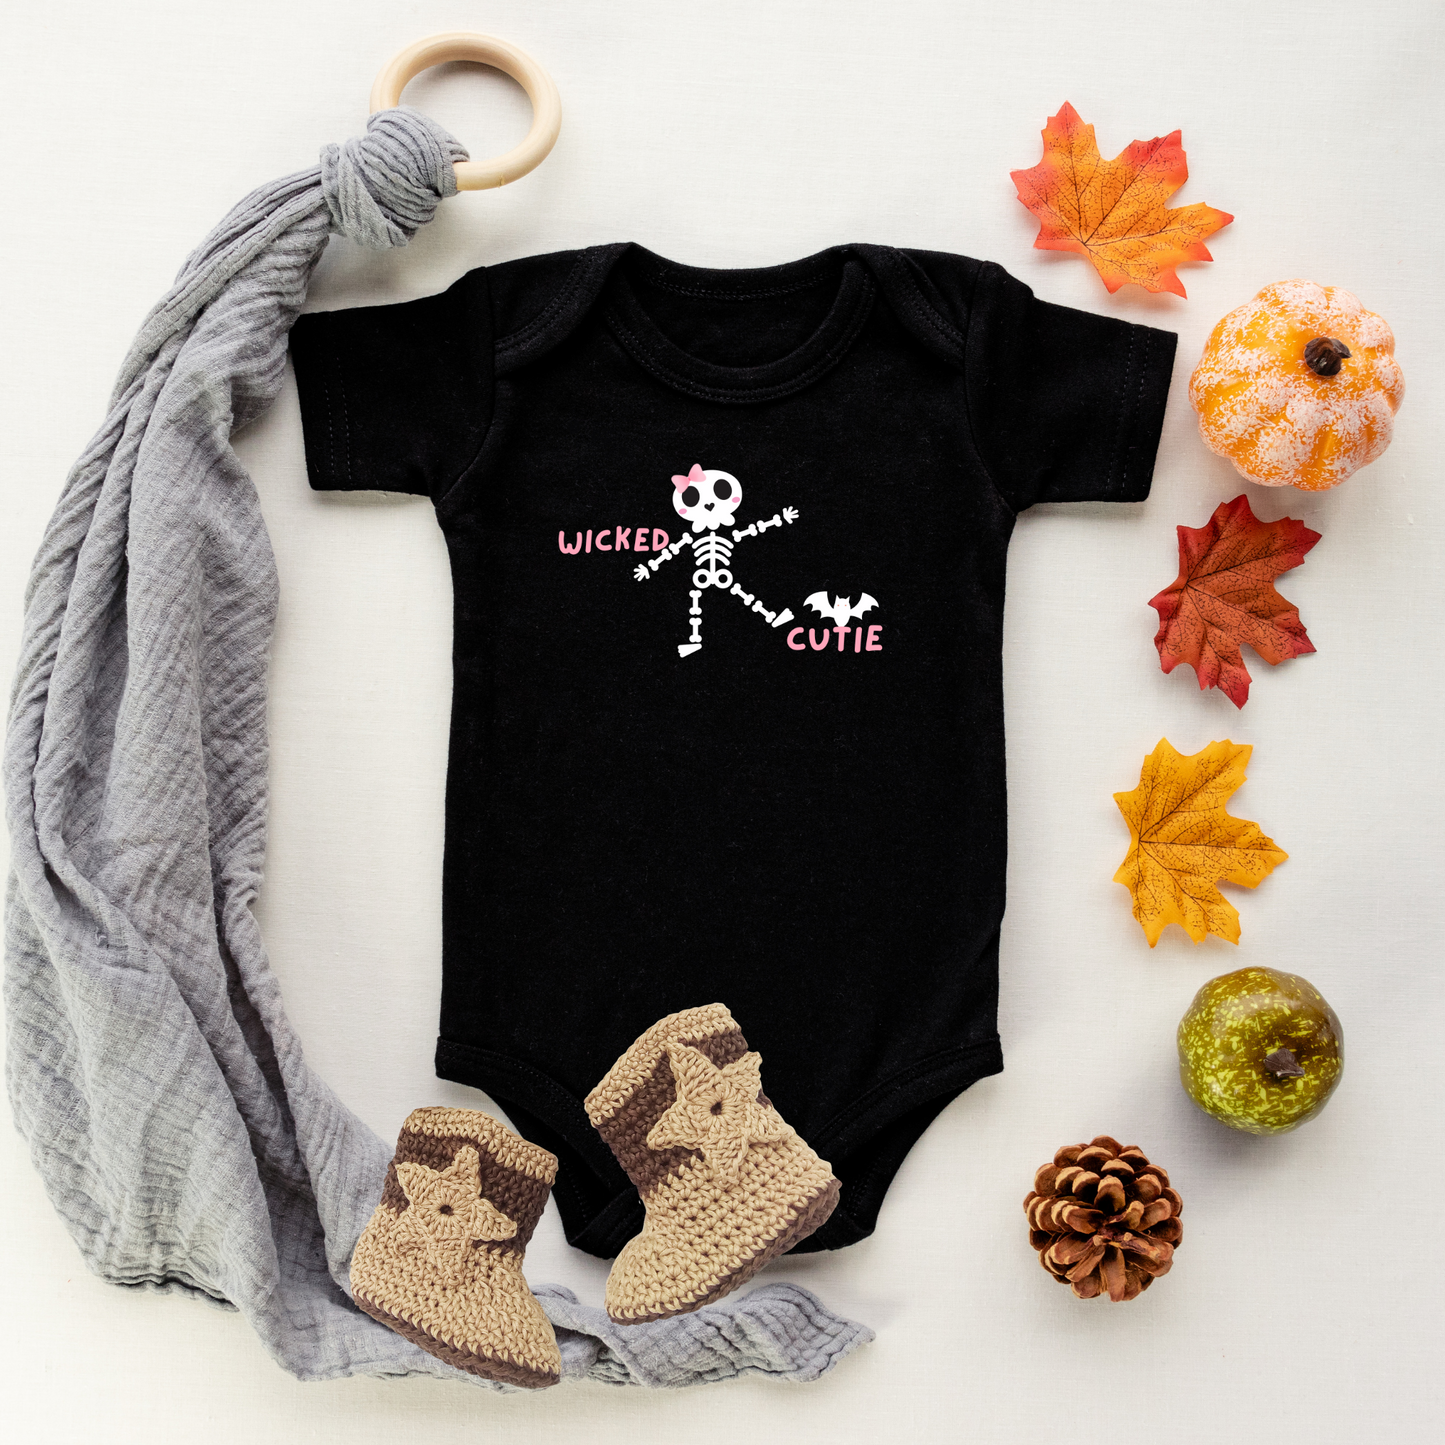 trick or treat baby bodysuit clothing, spooky, ghost funny, baby, kids onesie, Funny halloween baby, funny baby halloween costumes, baby halloween bodysuit, ghost, pumpkin fall baby, funny halloween baby costume ideas, funny halloween baby ideas, halloween baby bodysuit images, halloween baby bodysuit outfits, halloween baby bodysuit images, halloween bodysuit for baby